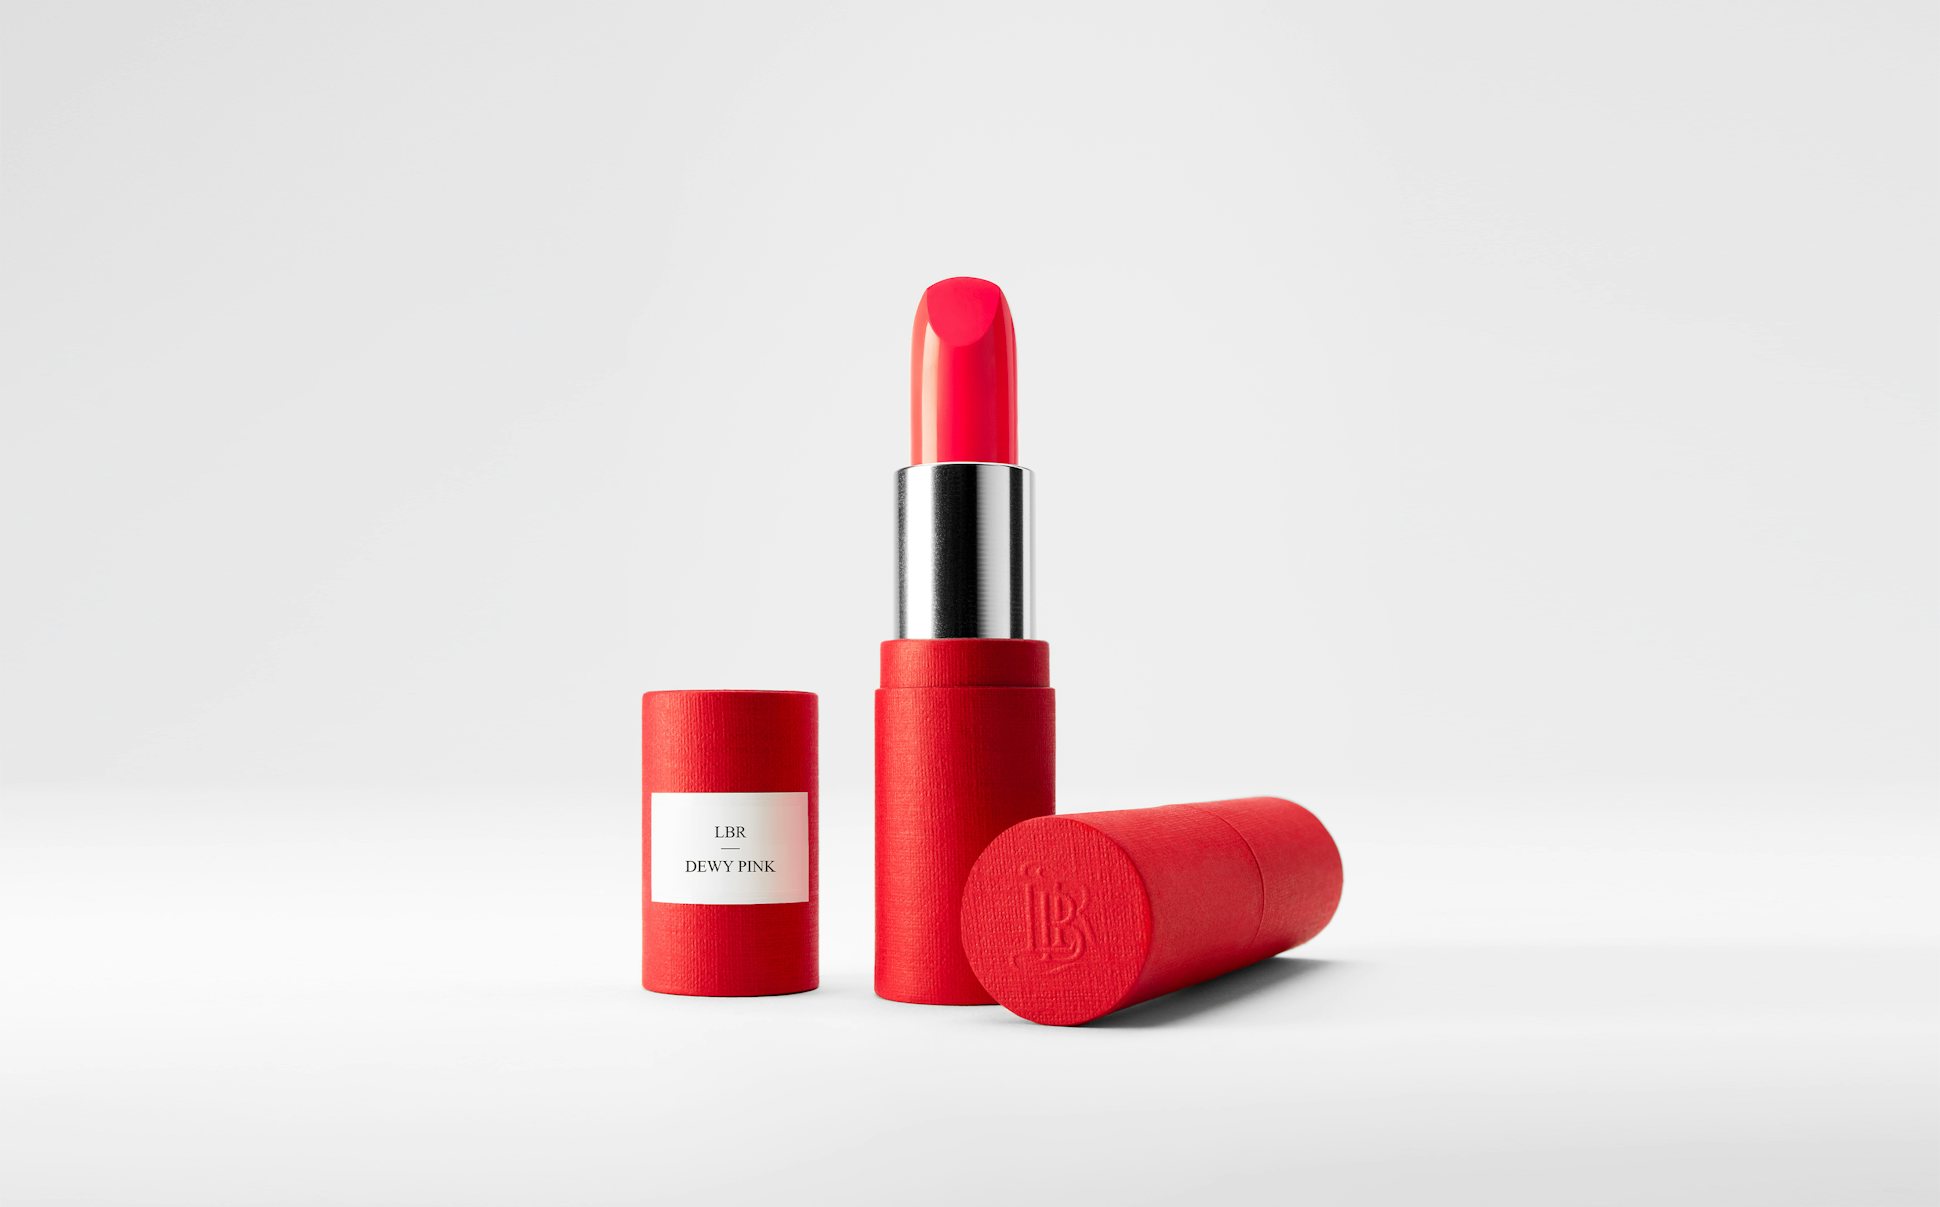 La bouche rouge Dewy Pink lipstick in the red paper case